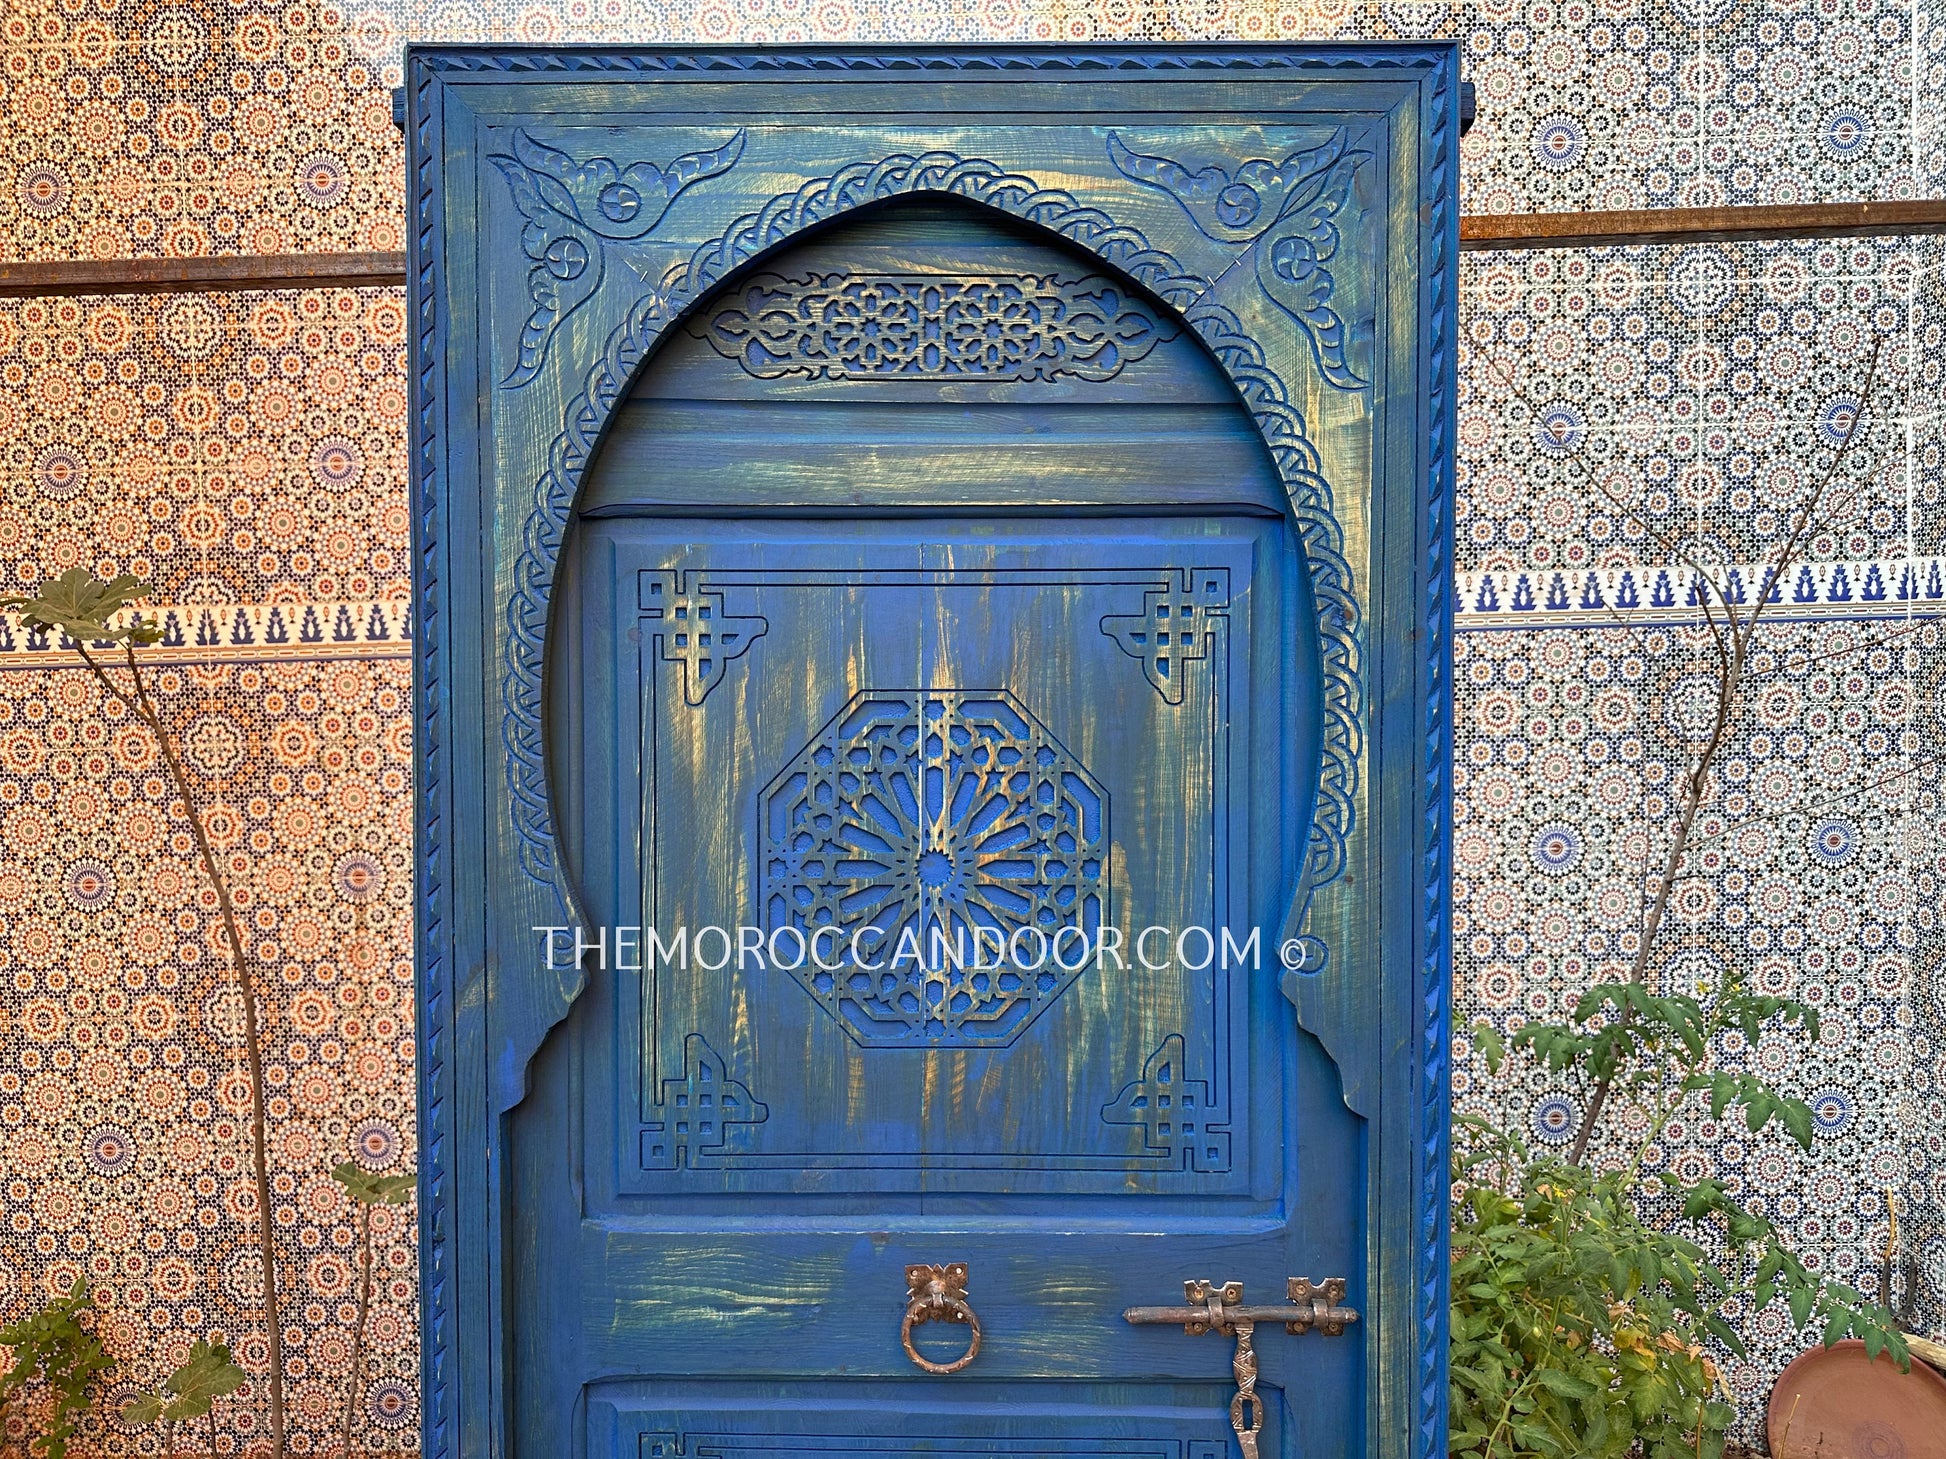 With This Custom Carved Moroccan Blue Door, you can bring the magic of Morocco into your home.